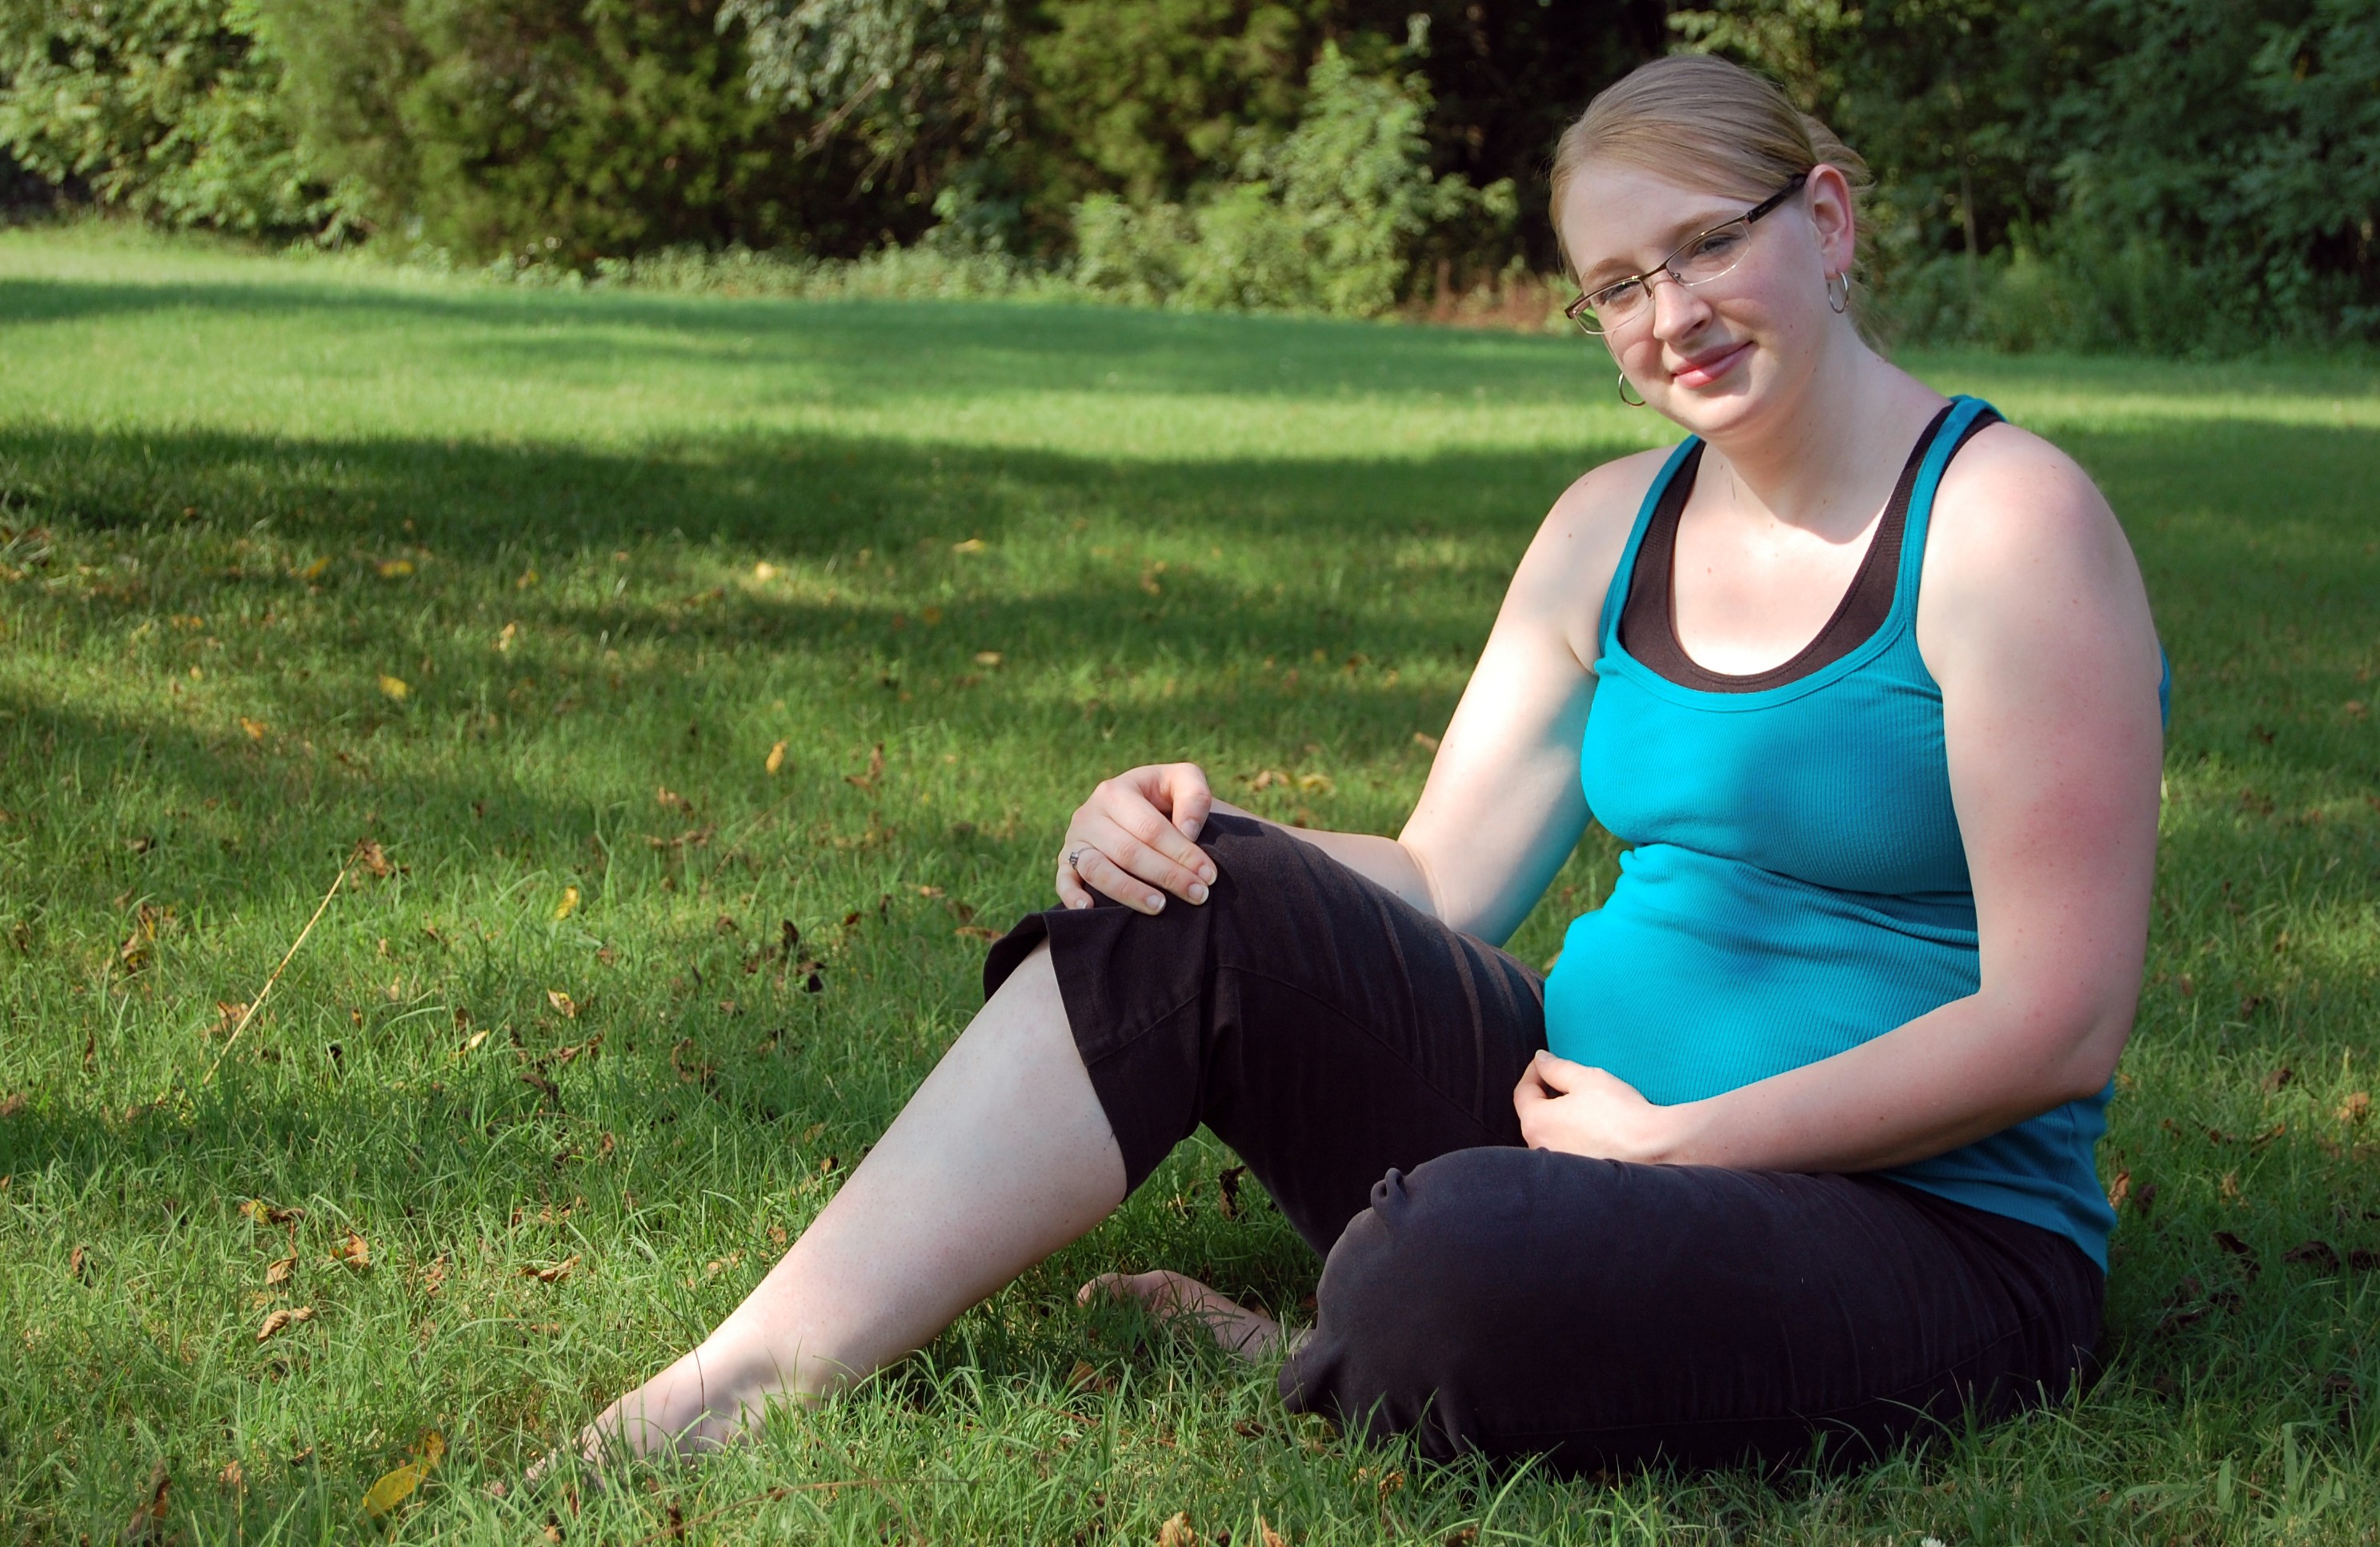 Working Out During Pregnancy: Myths Vs. Facts